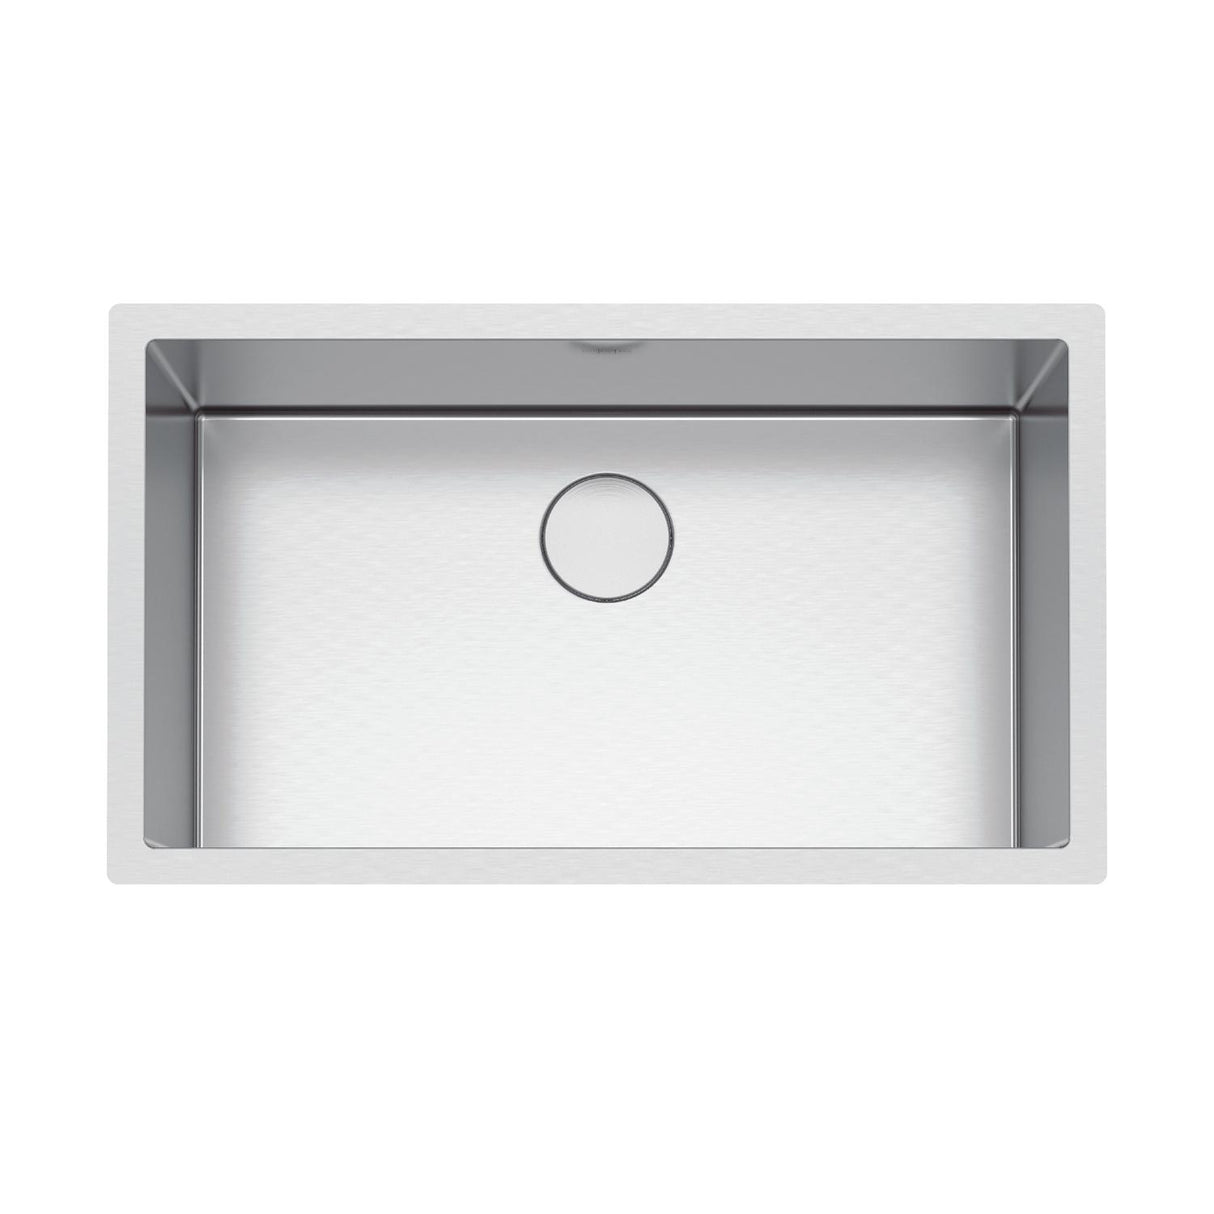 FRANKE PS2X110-30 Professional 2.0 32.5-in. x 19.5-in. 16 Gauge Stainless Steel Undermount Single Bowl Kitchen Sink -PS2X110-30 In Diamond